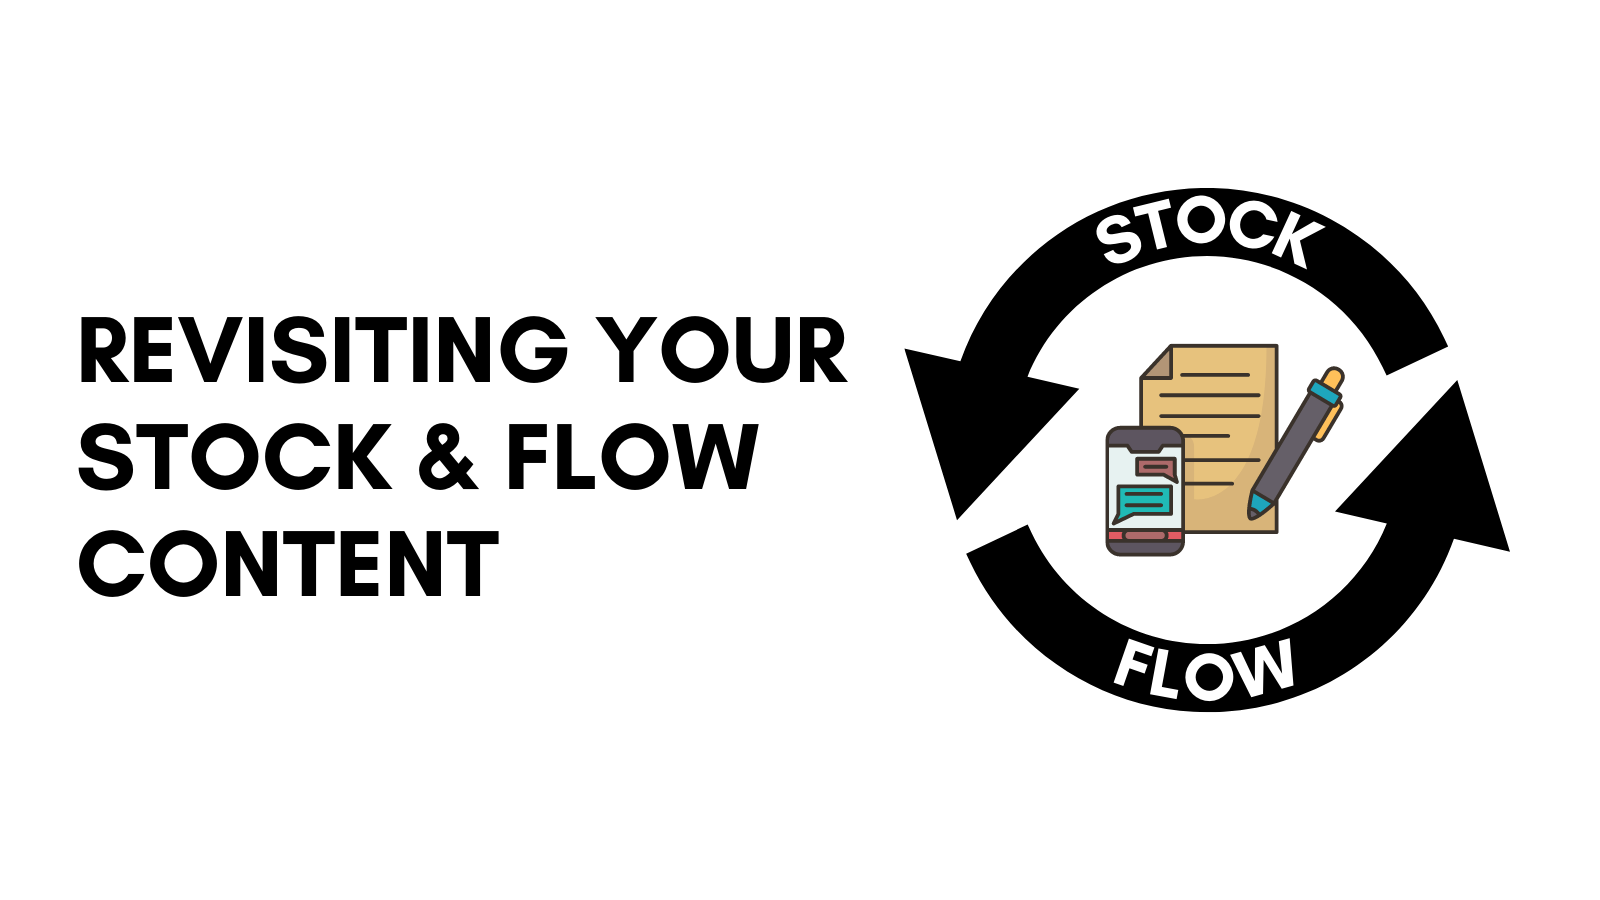 @jongolson/revisiting-your-stock-and-flow-content